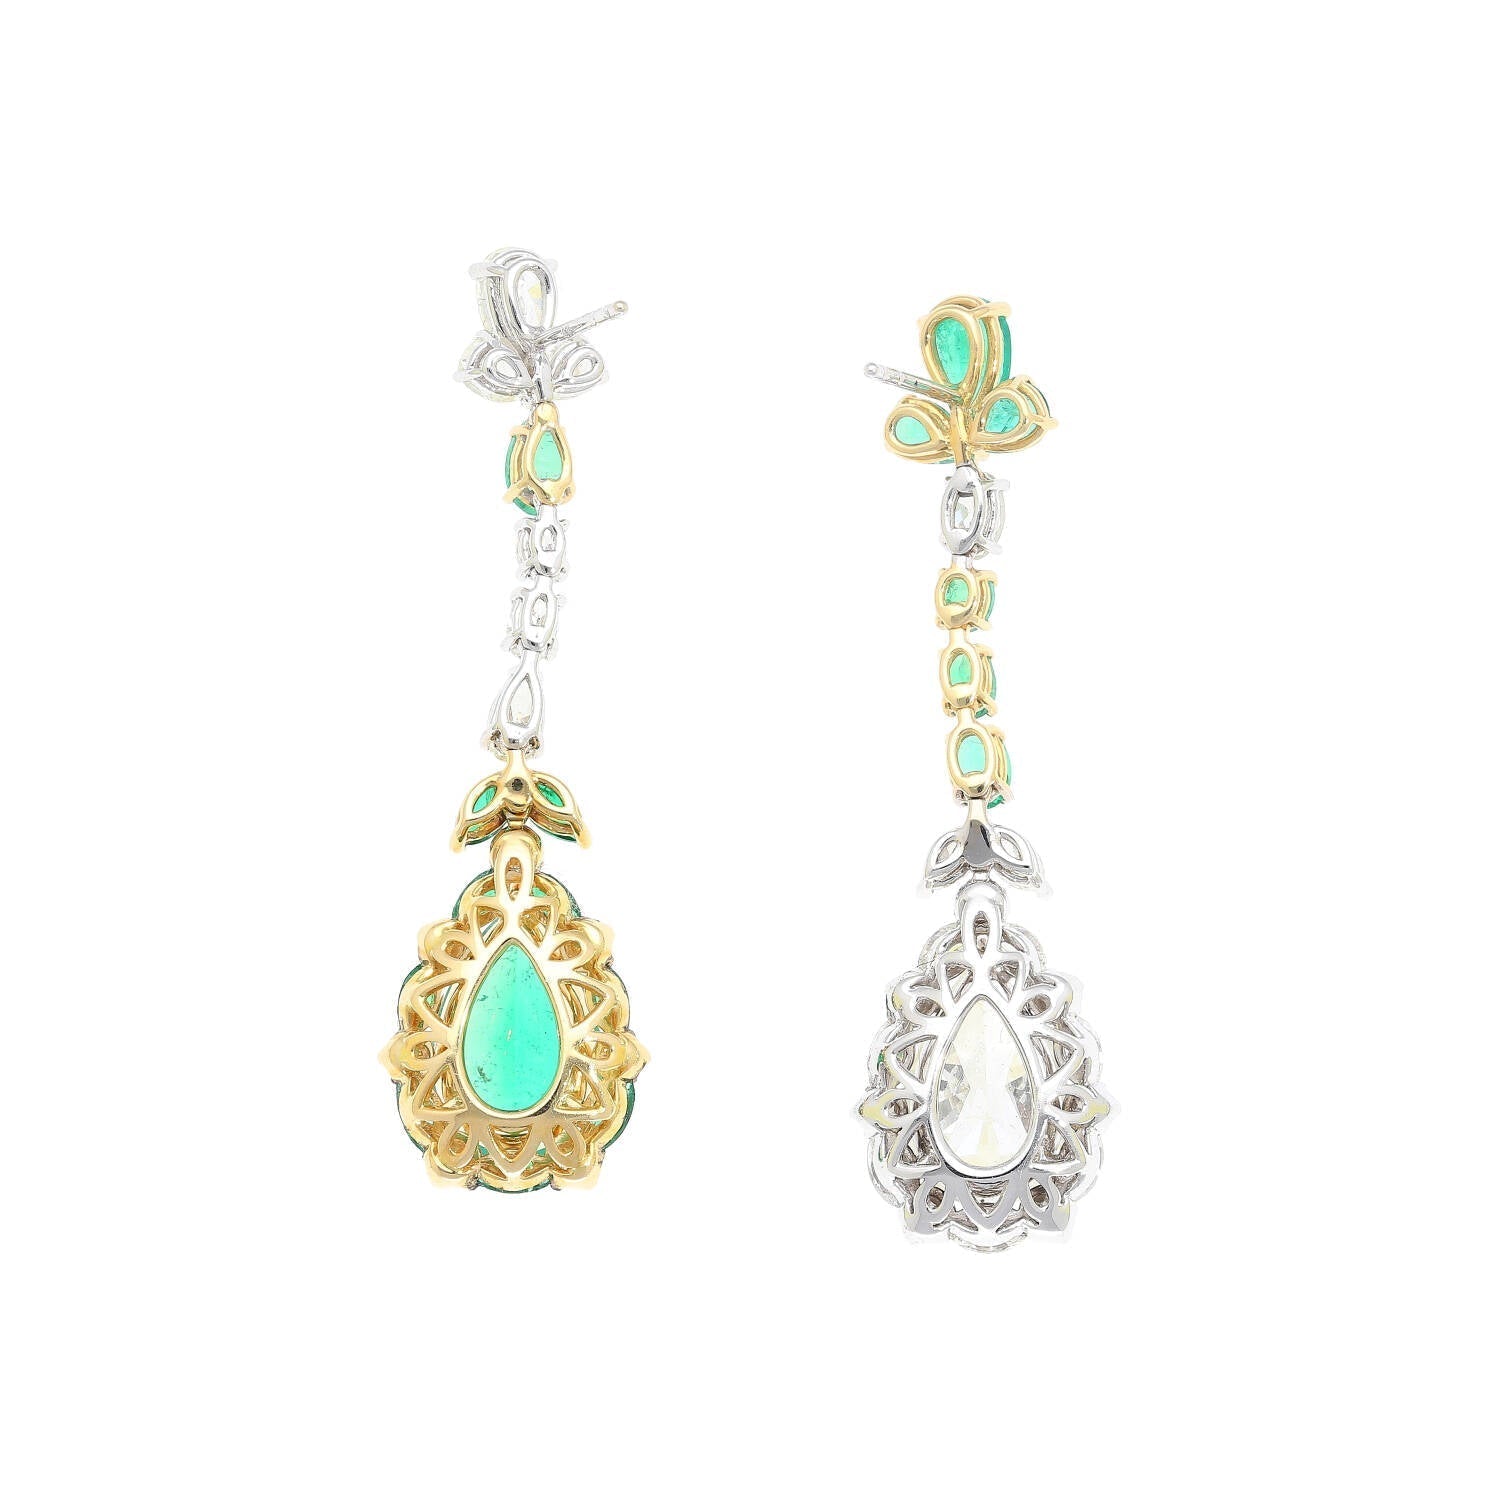 10 Carat Natural Emerald and Diamond Mirrored Drop Earrings in 18K Gold